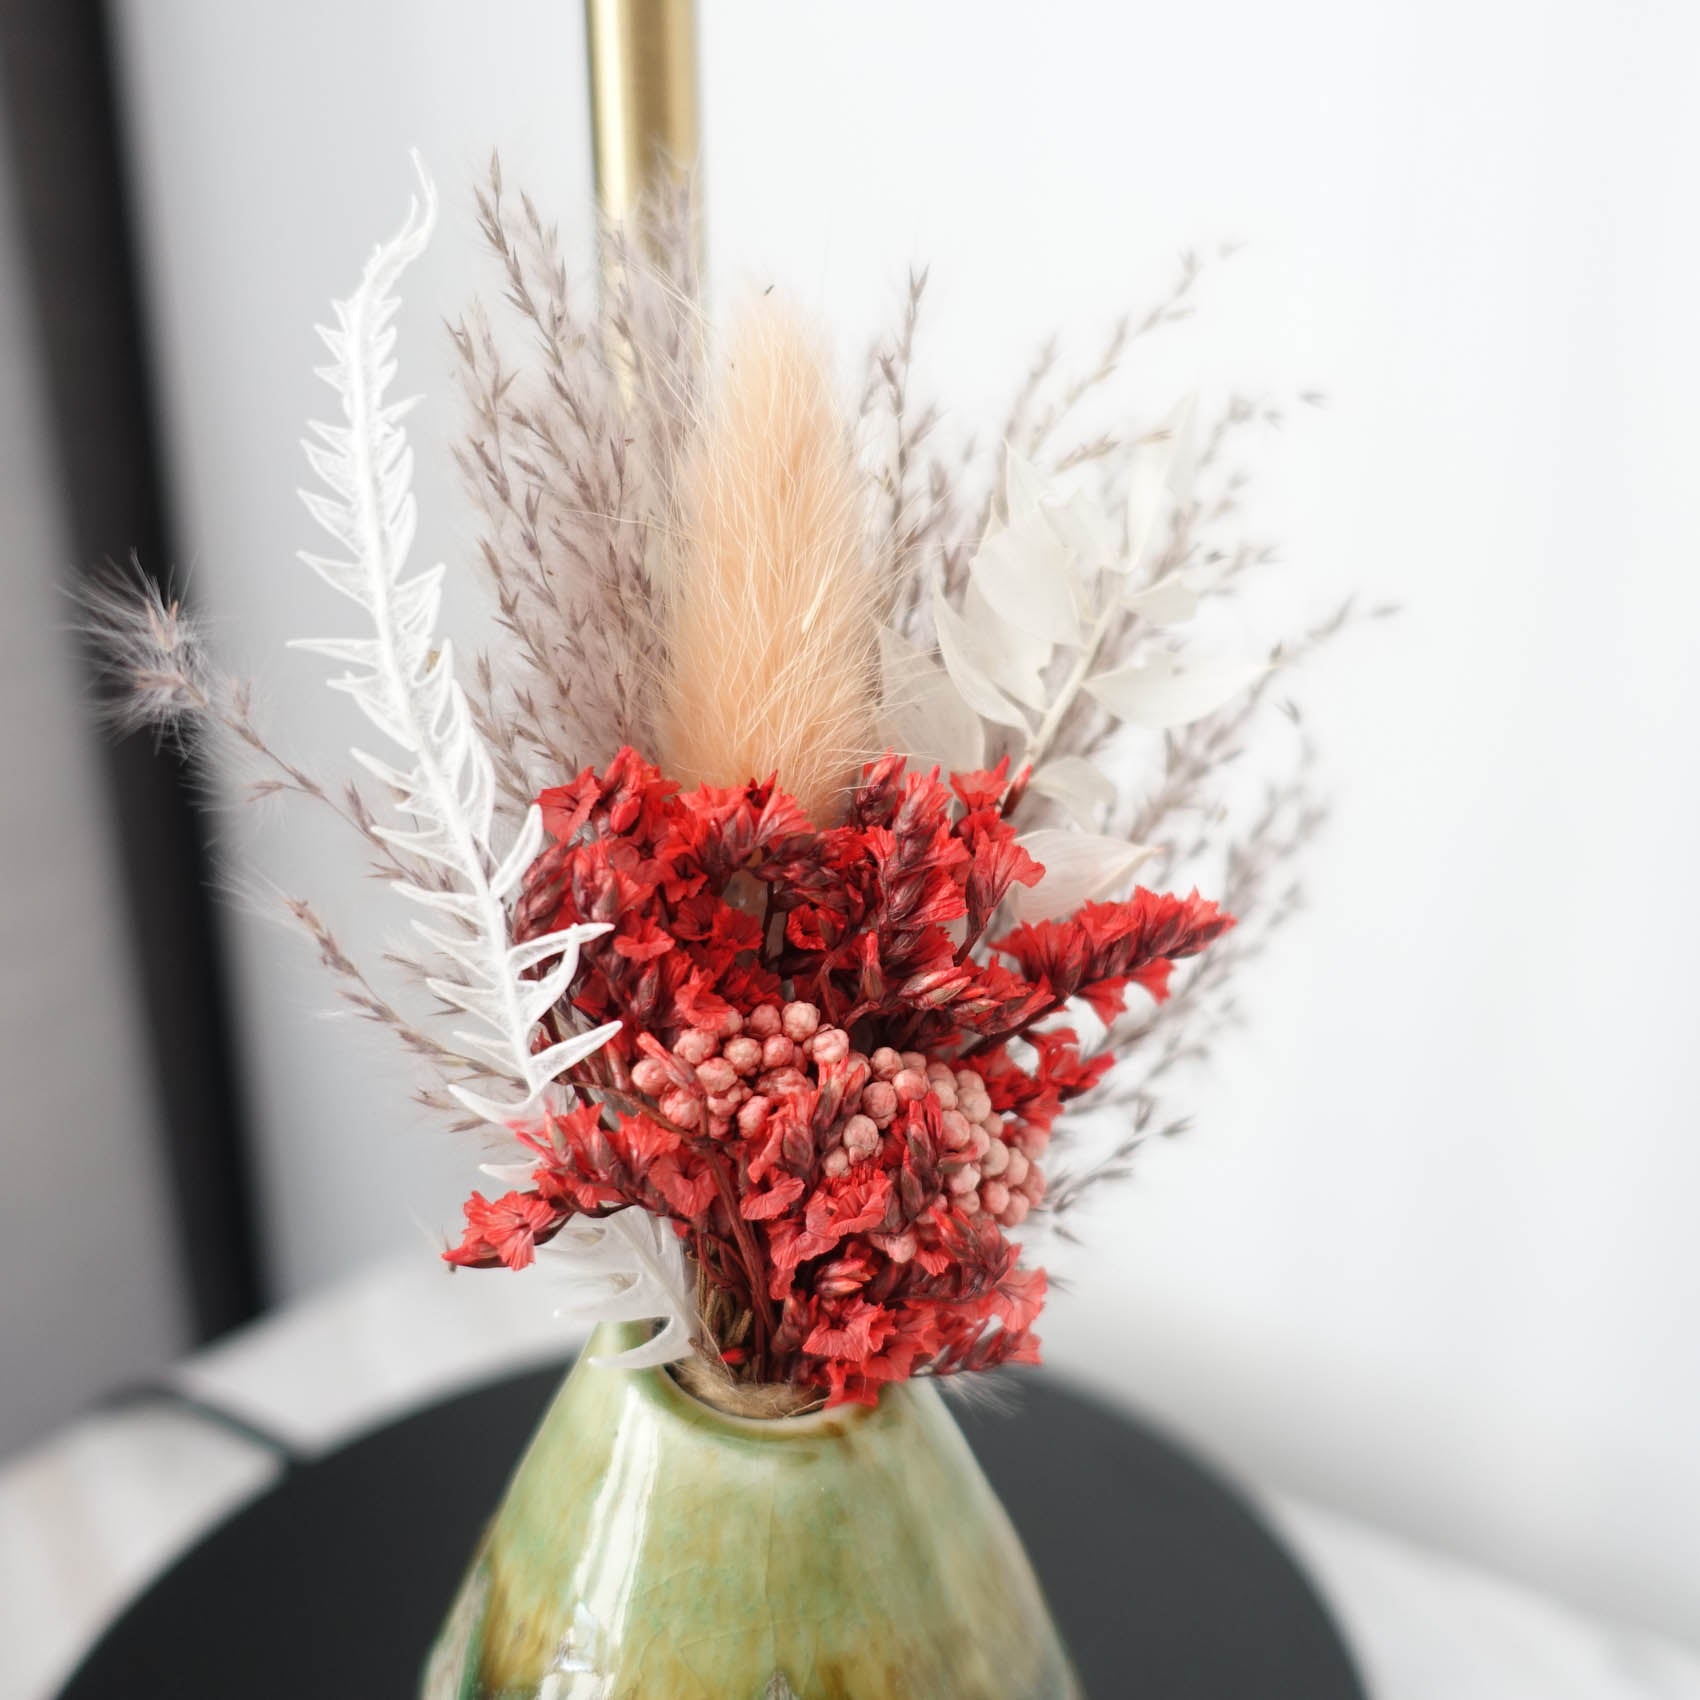 red pink small mini dried flower bouquet for gift hampers boxes wedding home vase australia